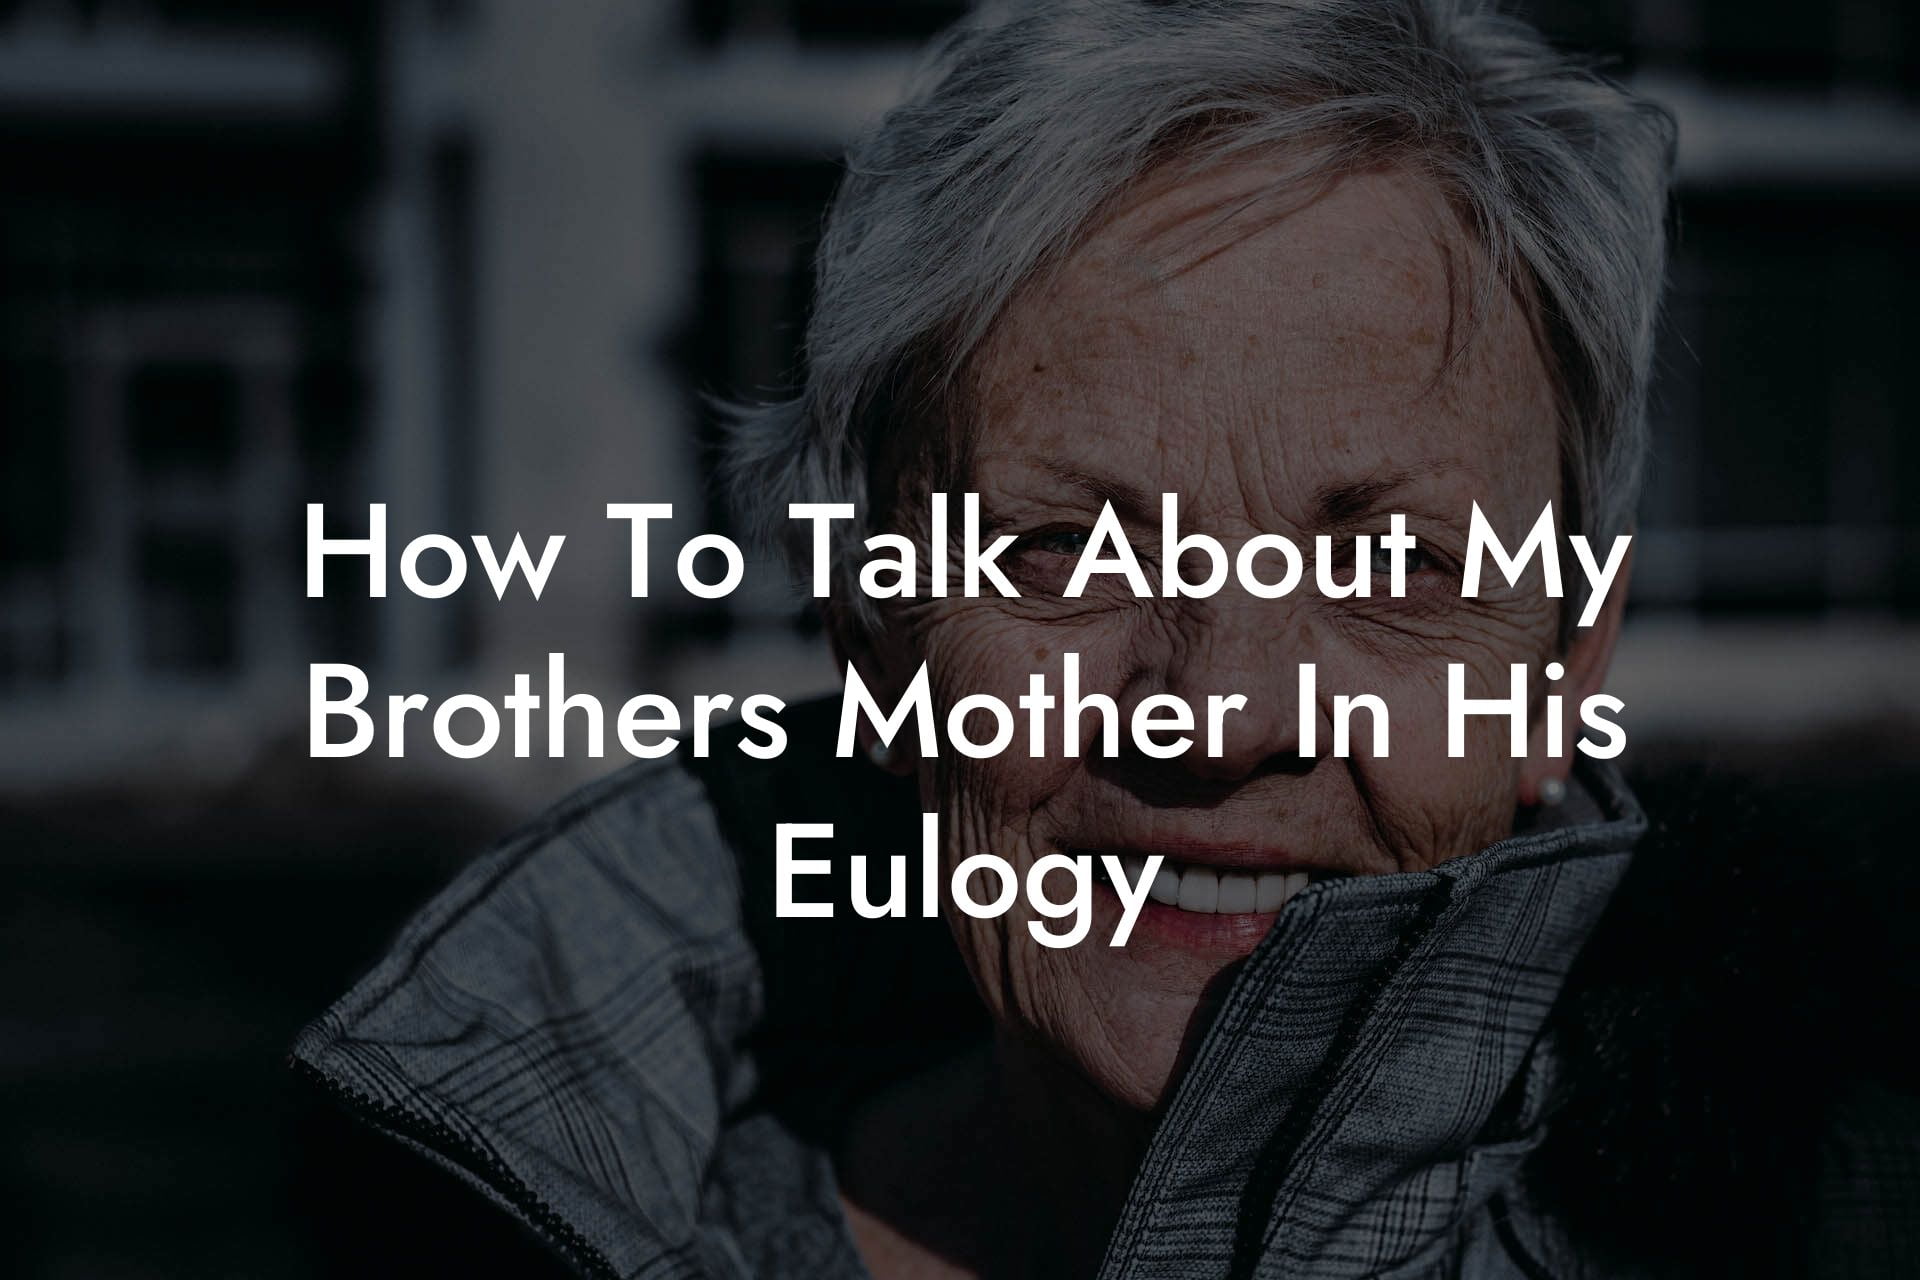 How To Talk About My Brother's Mother In His Eulogy